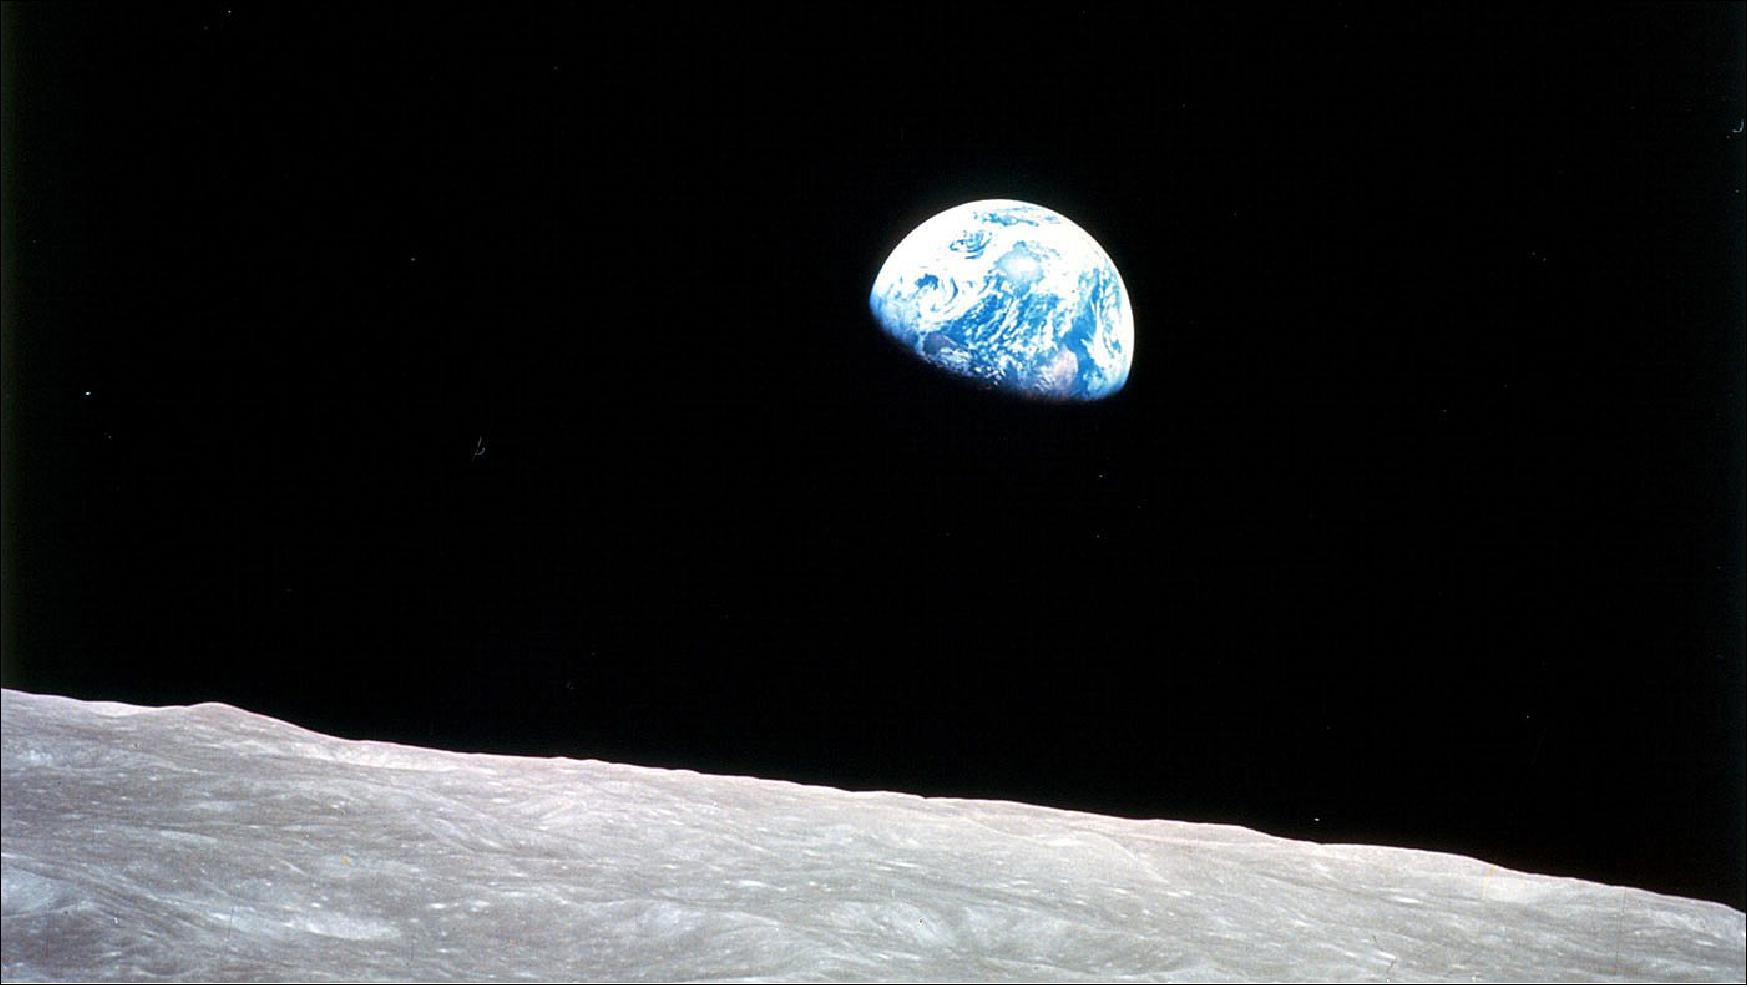 Figure 1: Earthrise by Apollo 8 astronaut William Anders, December 1968. Earth at gibbous phase as seen from the Moon (image credit: NASA)